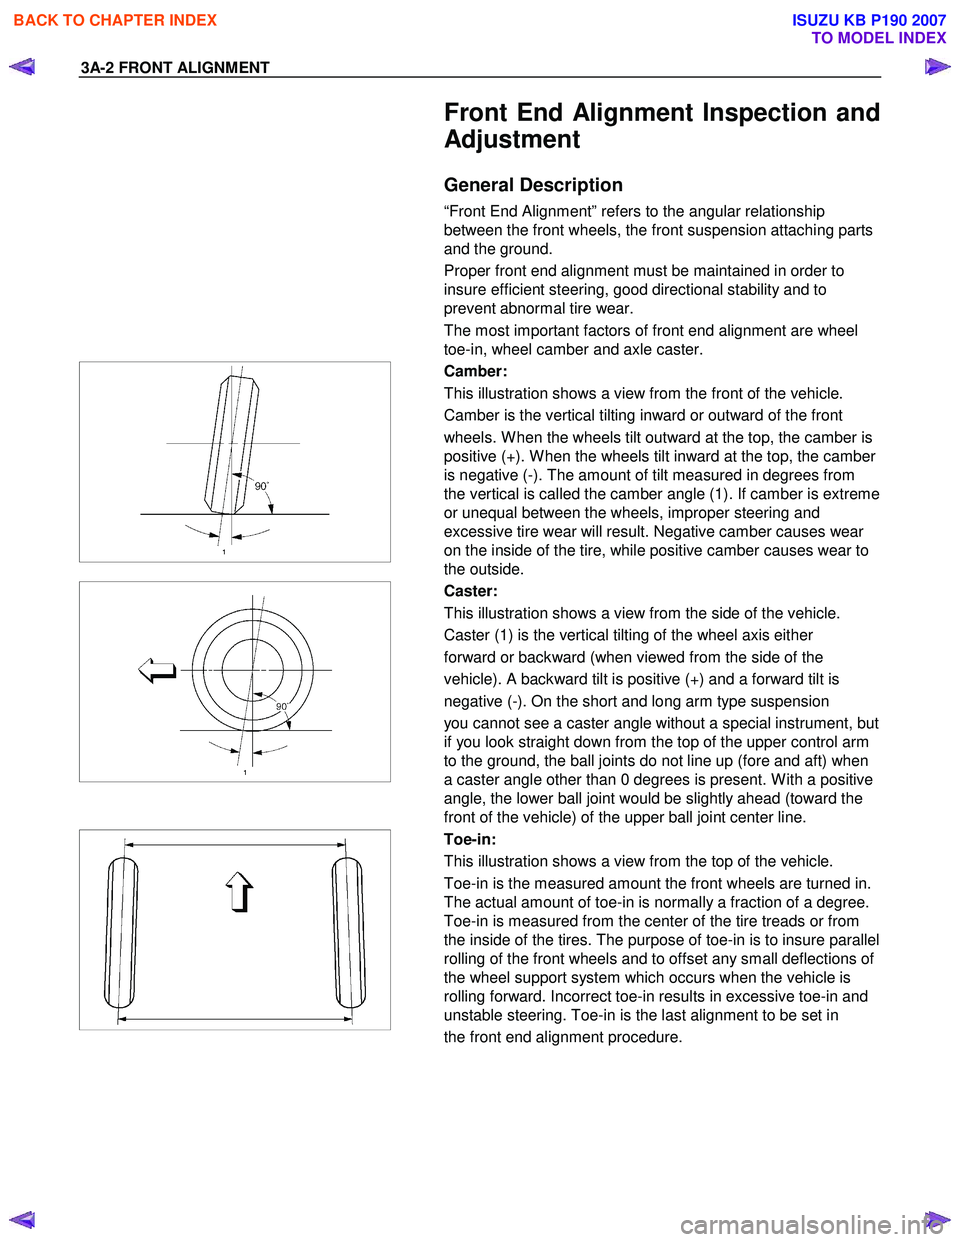 ISUZU KB P190 2007  Workshop User Guide 3A-2 FRONT ALIGNMENT 
  
Front End Alignment Inspection and 
Adjustment 
General Description 
“Front End Alignment” refers to the angular relationship  
between the front wheels, the front suspens